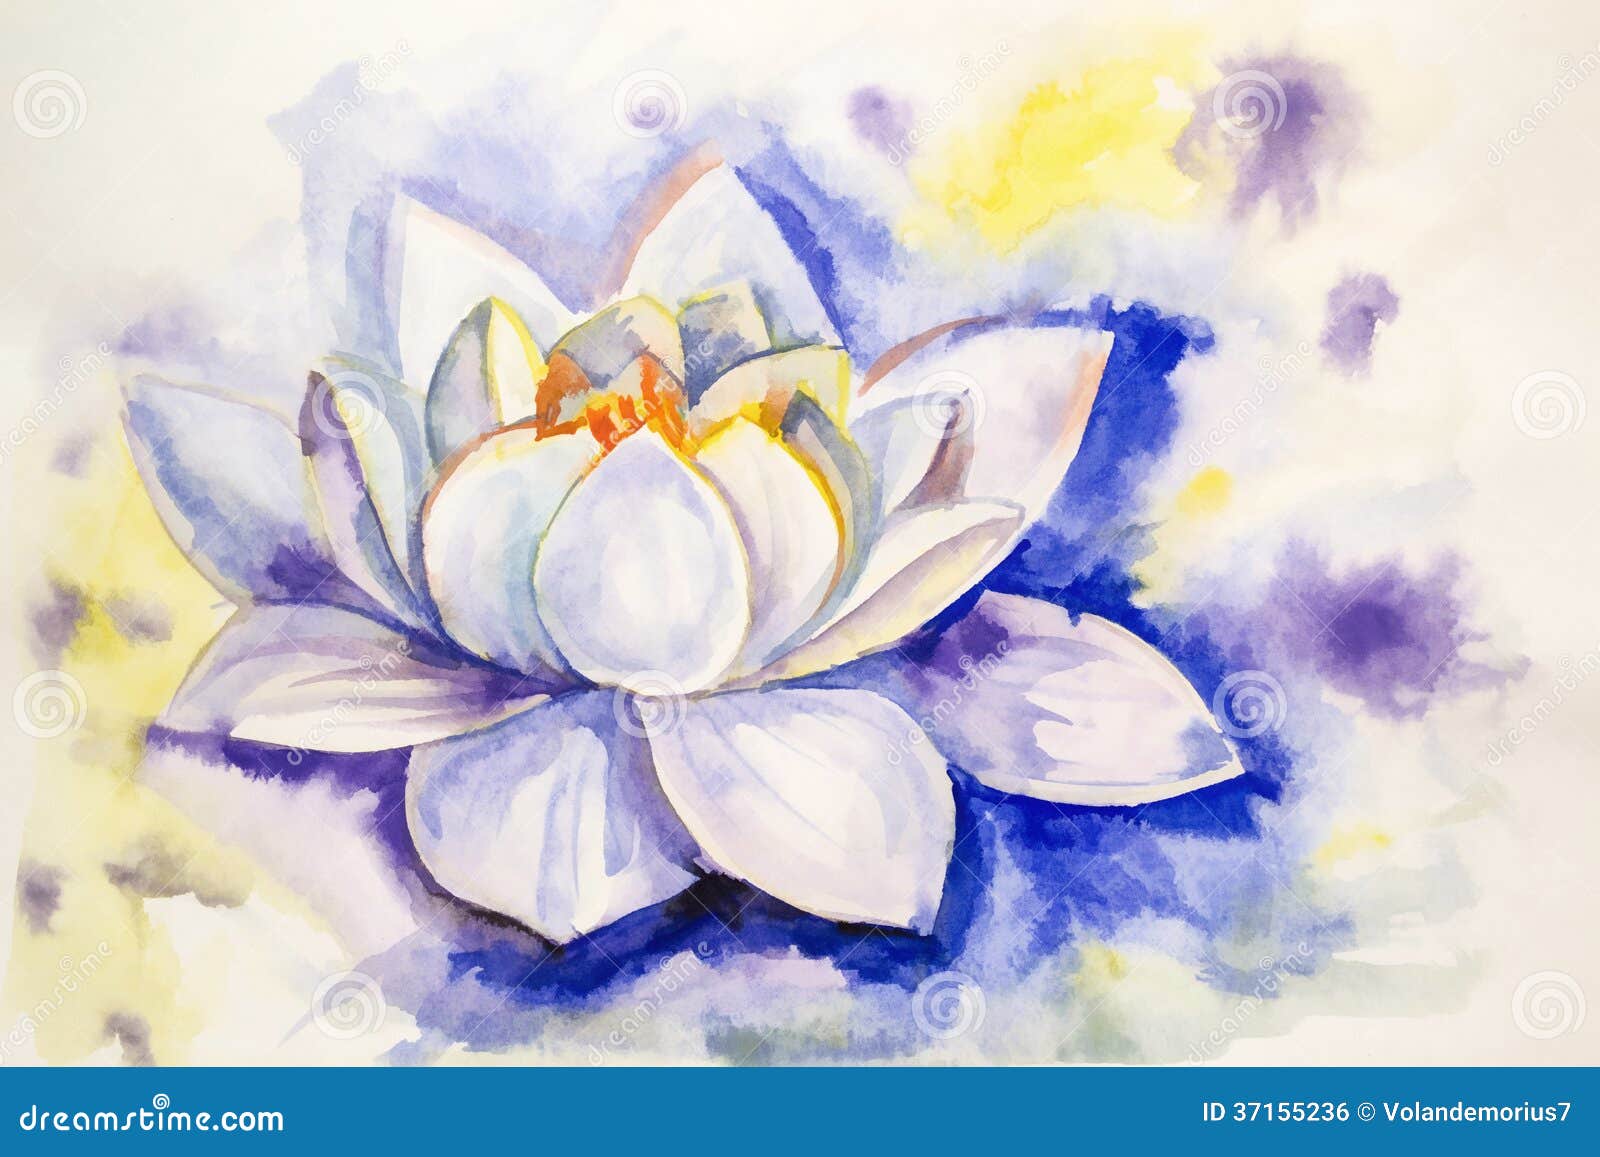 Drawing Water Lily White Paint Royalty Free Stock Image 